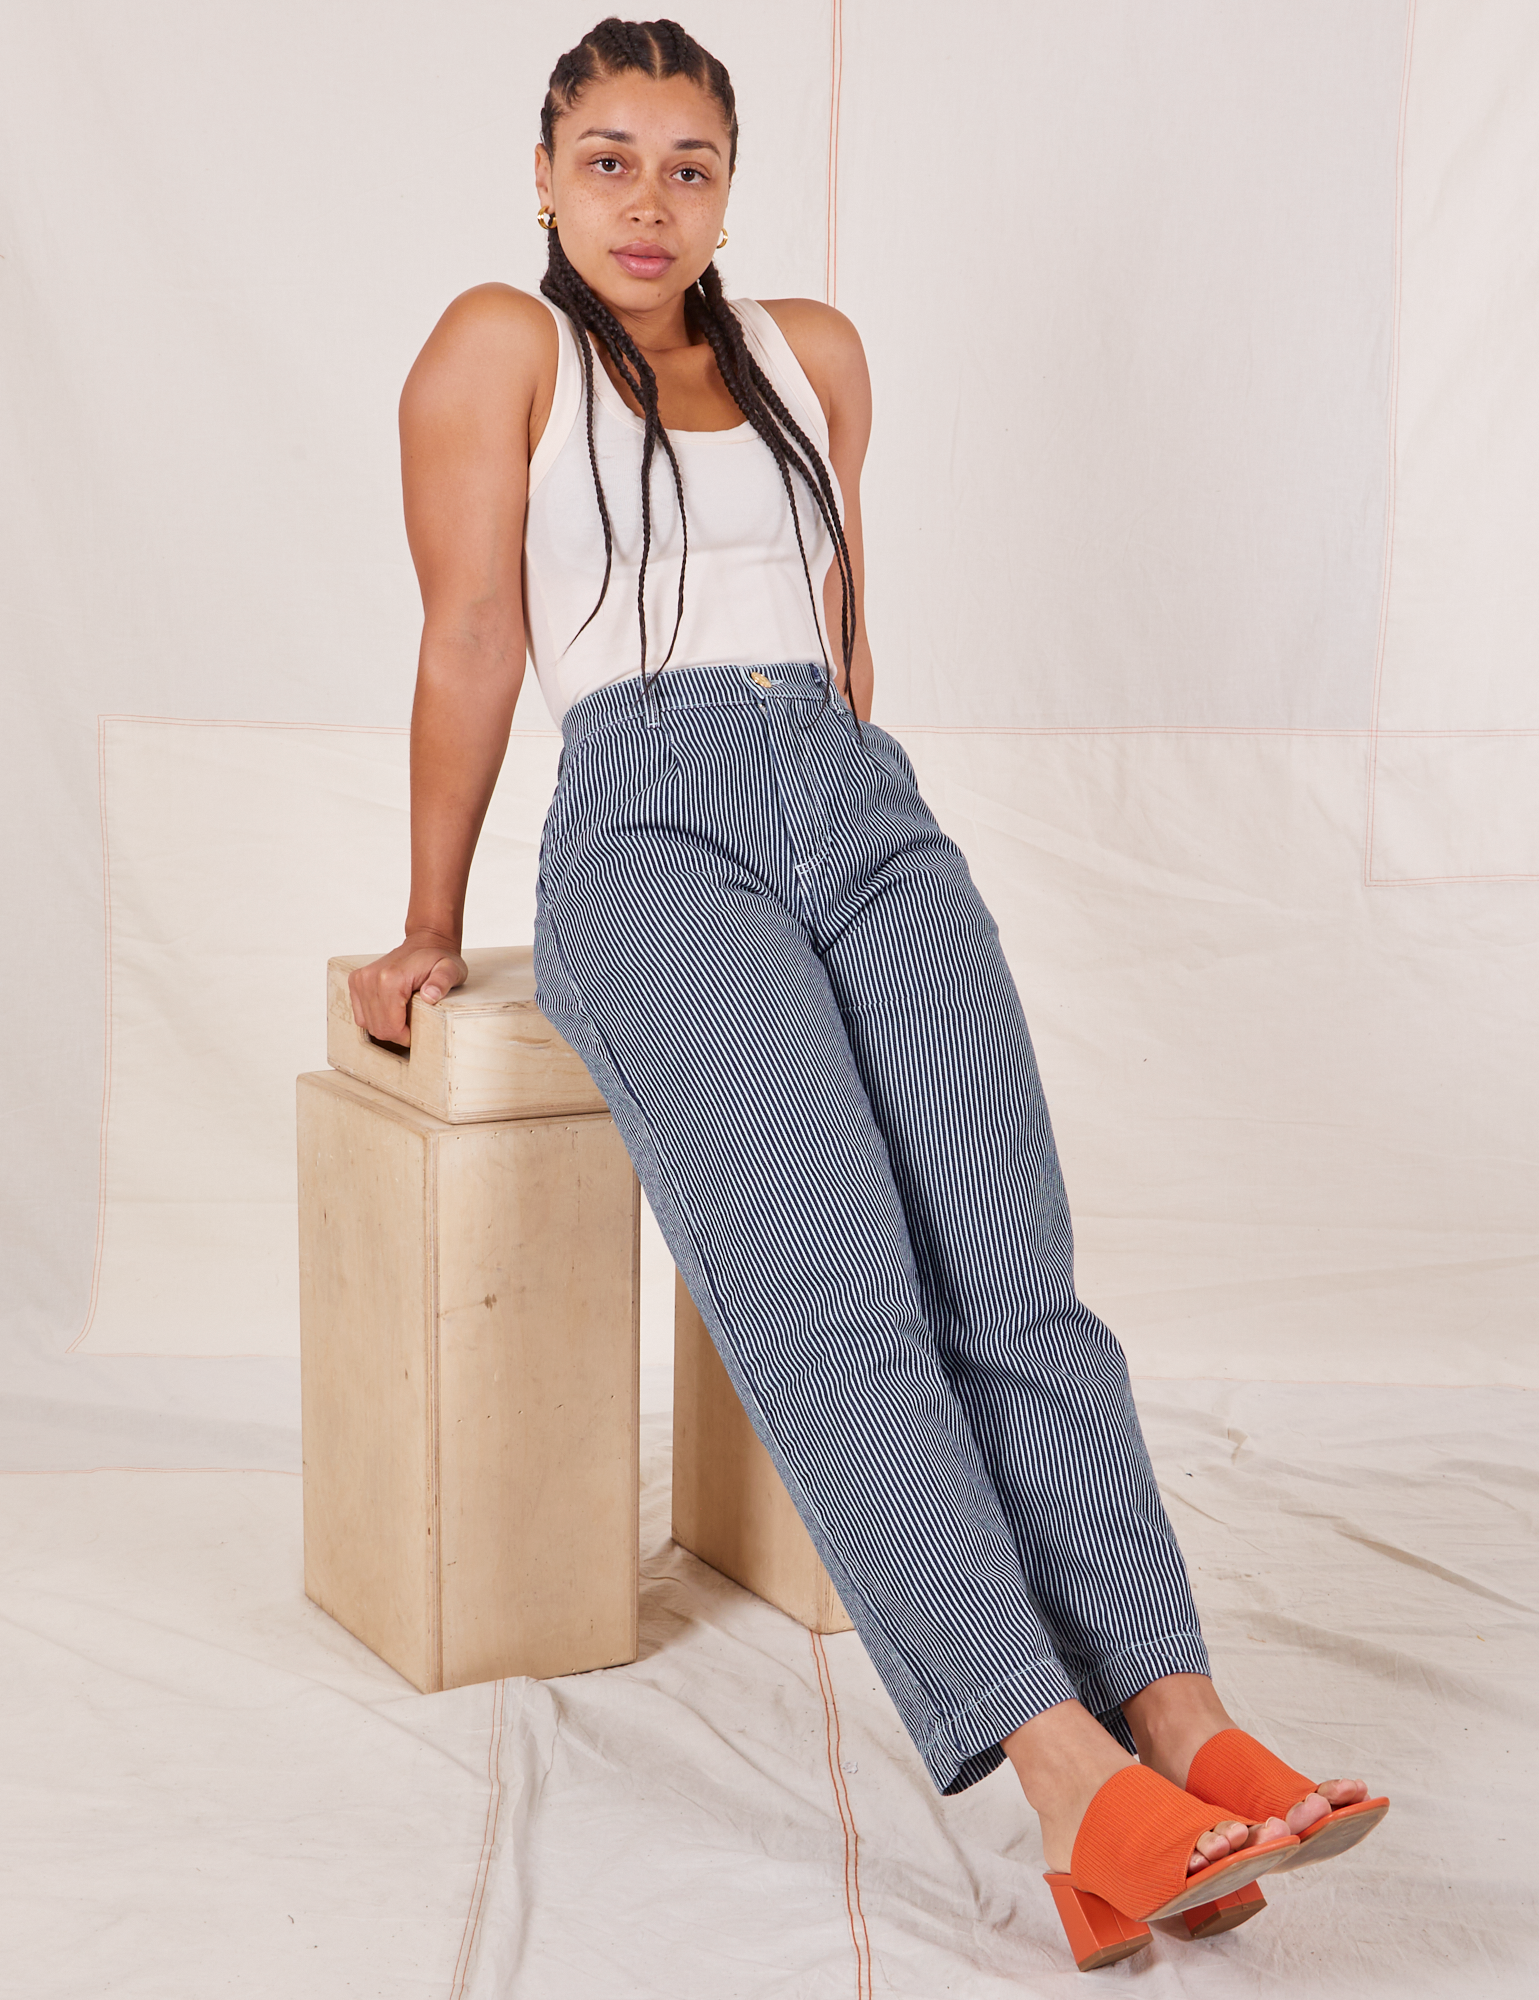 Gabi is wearing Denim Trouser Jeans in Railroad Stripe and a vintage off-white Tank Top